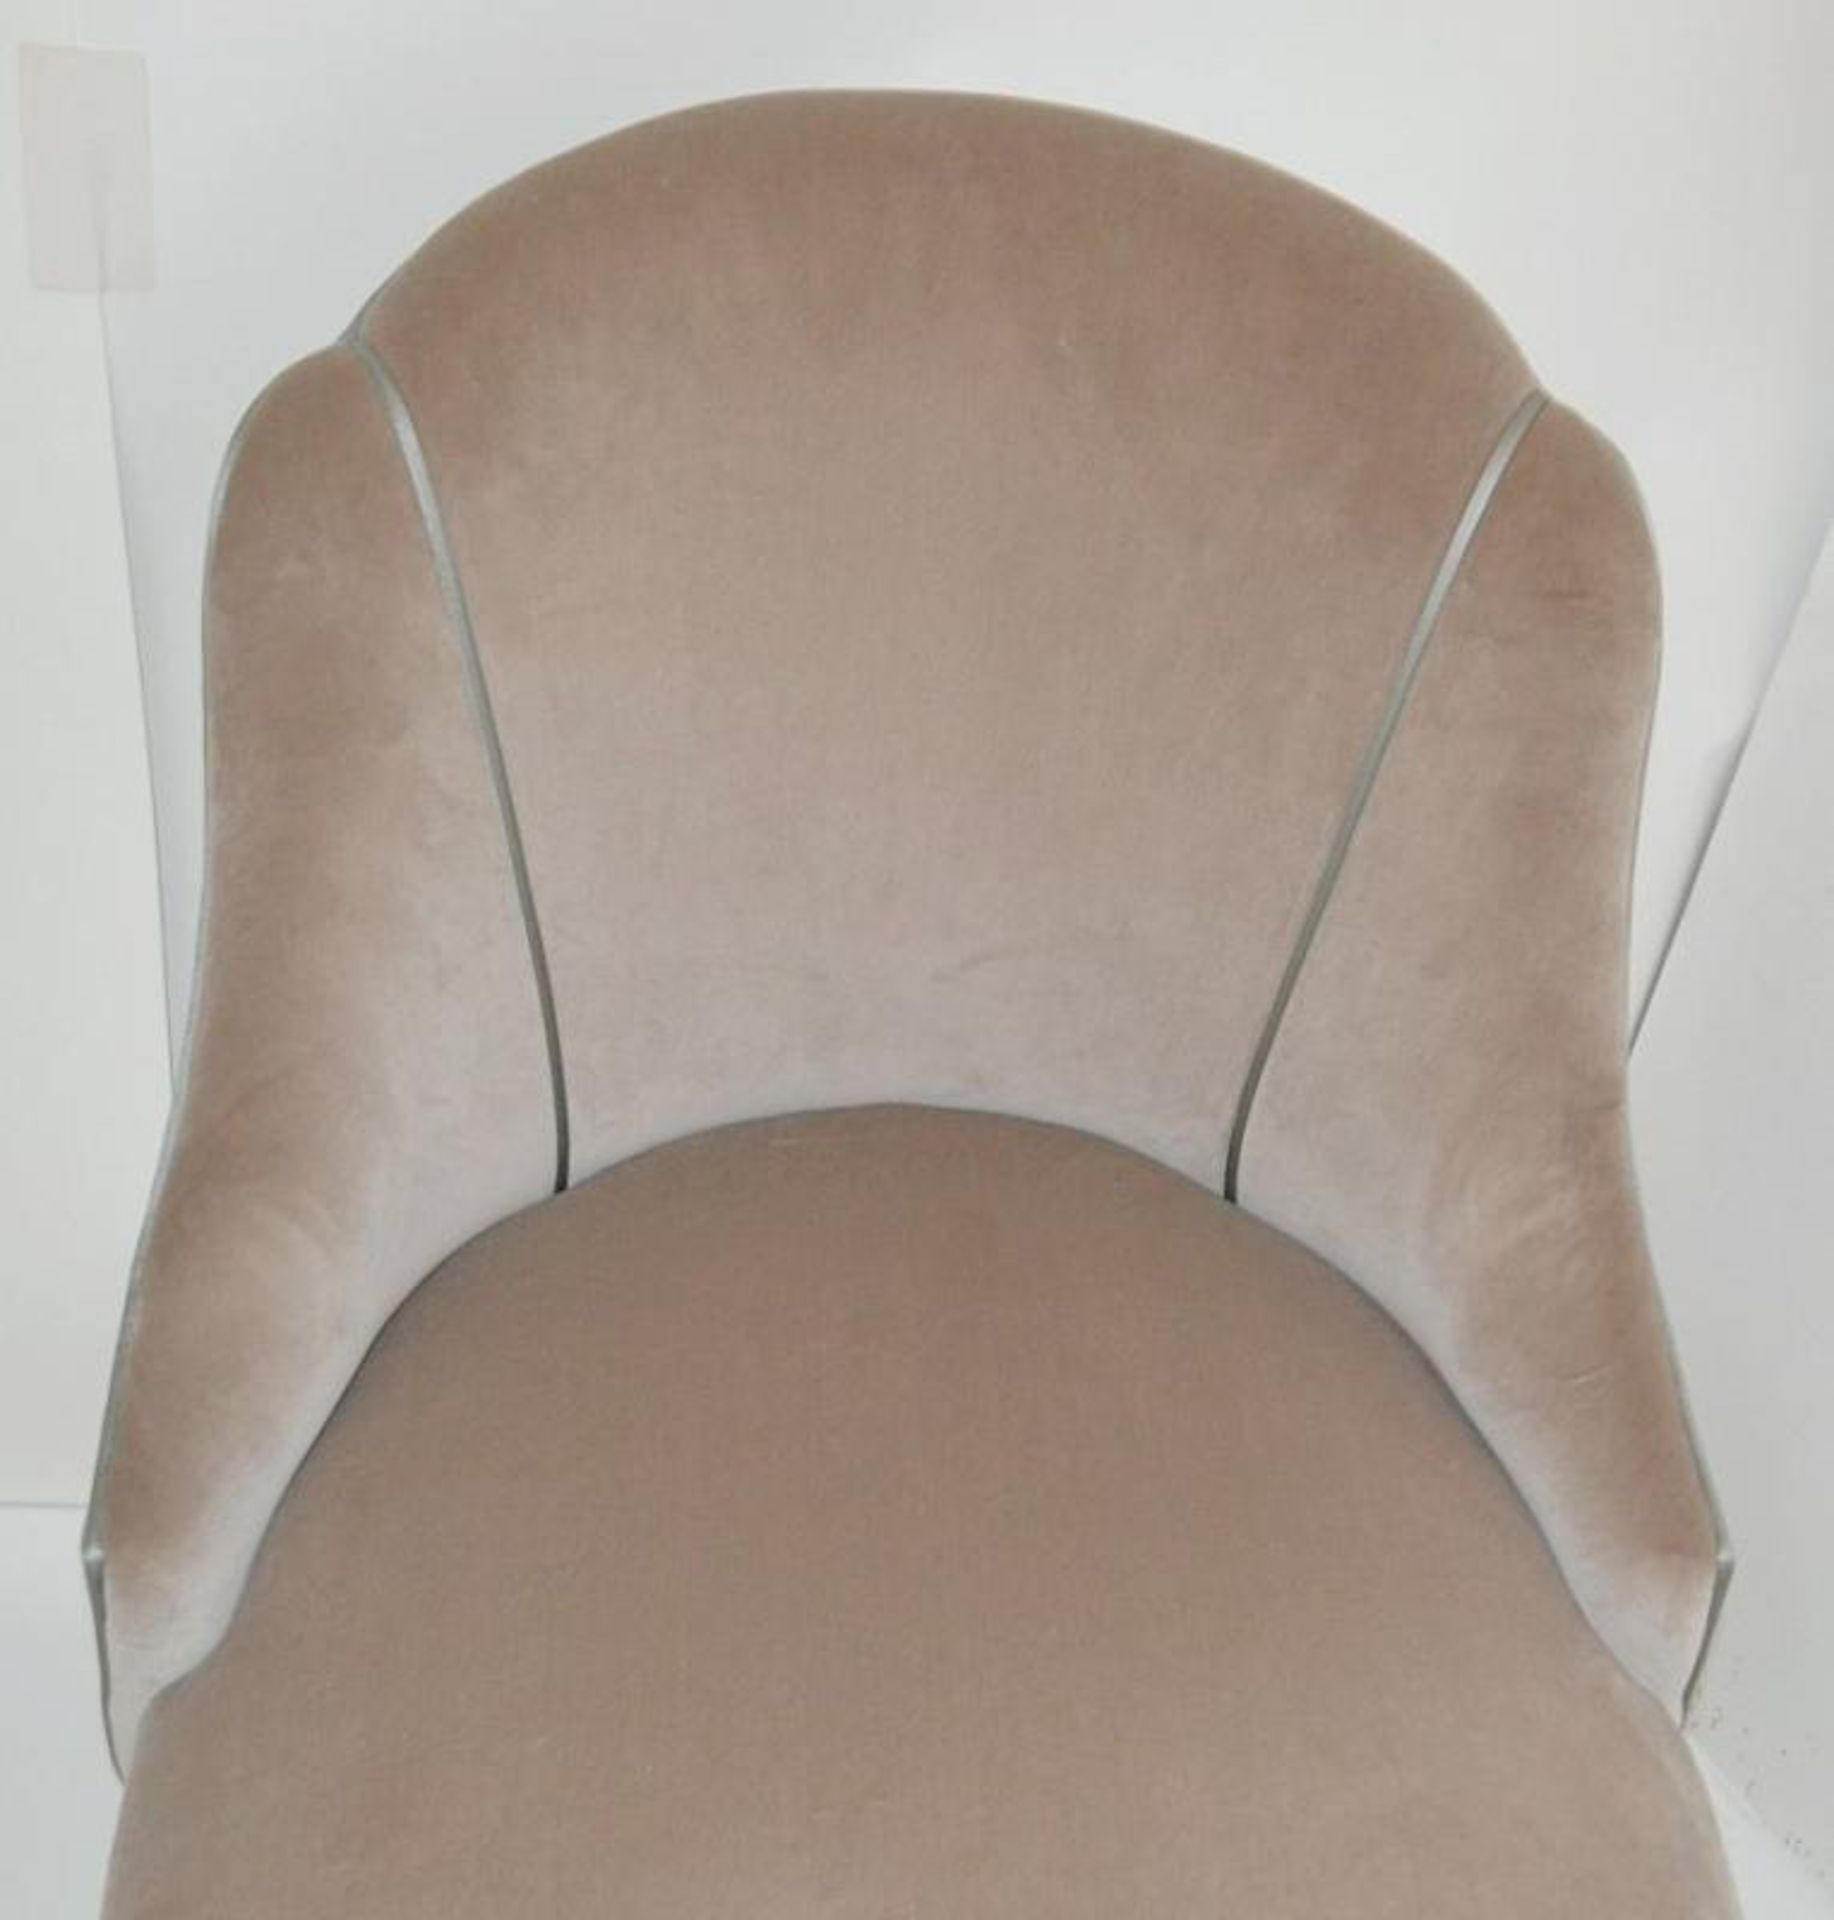 1 x REED &amp; RACKSTRAW "Cloud" Handcrafted Velvet Upholstered Chair - Dimensions: H87 x W58 x D5 - Image 7 of 7